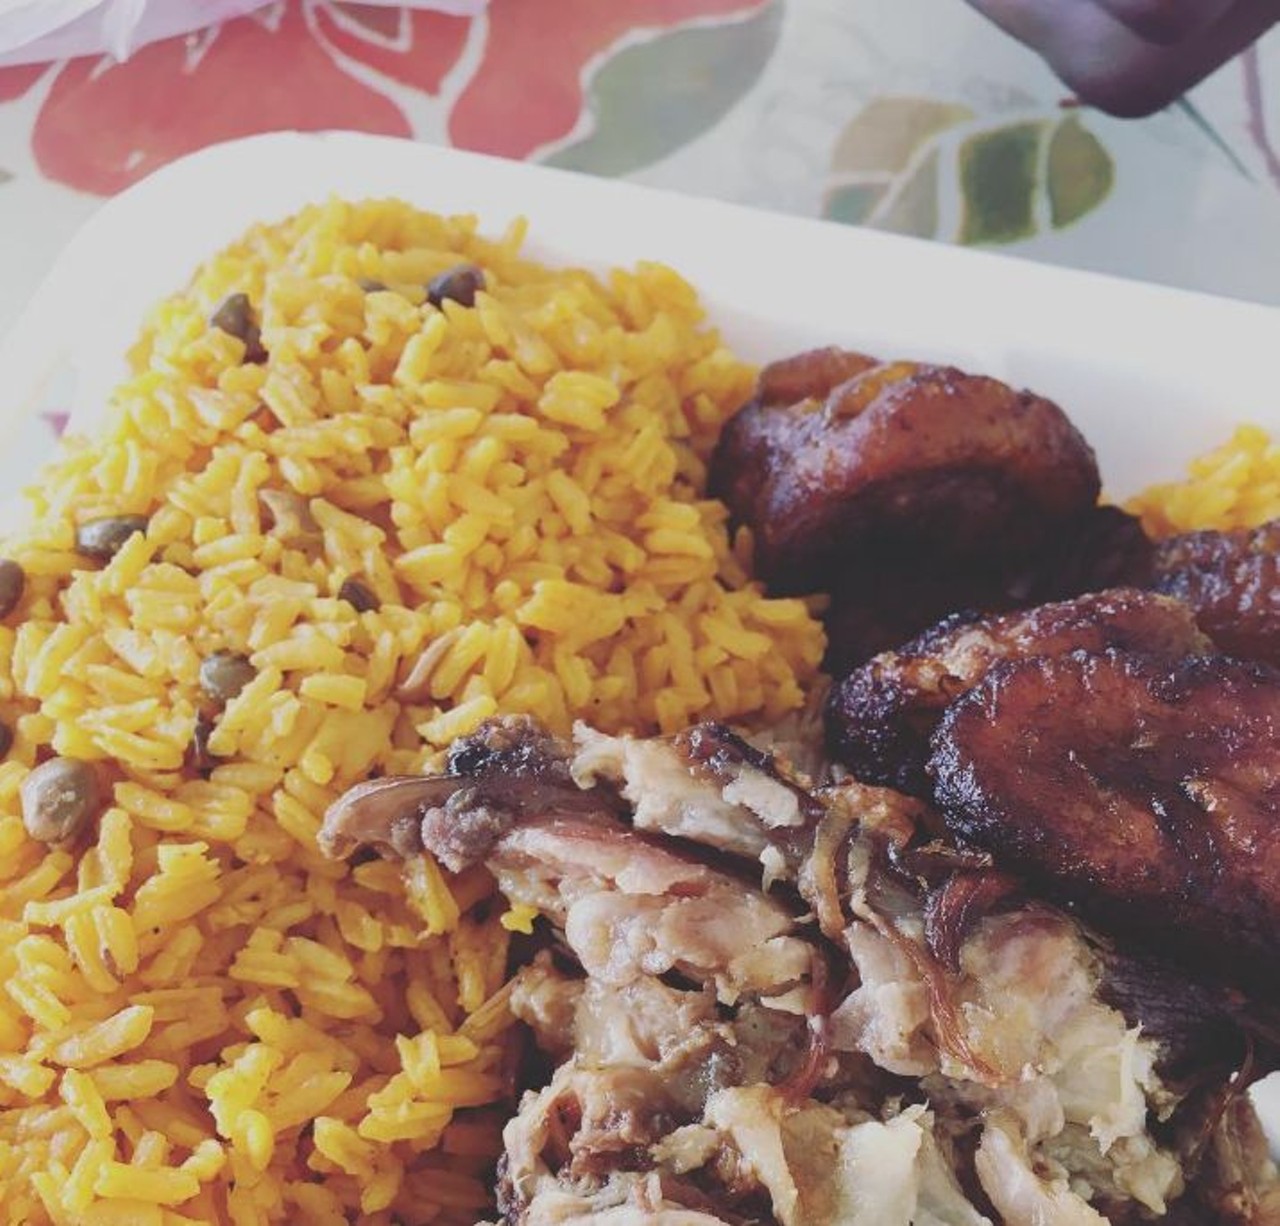 What we recommend: lechon with arroz con gandules and sweet plantains
The lechon is juicy, flavorful, and filling. Enjoy the soft and crunchy textures of the pork, and pair it with rice and pigeon peas and sweet plantains for an unbeatable combination.
Photo via ayomeredith/Instagram